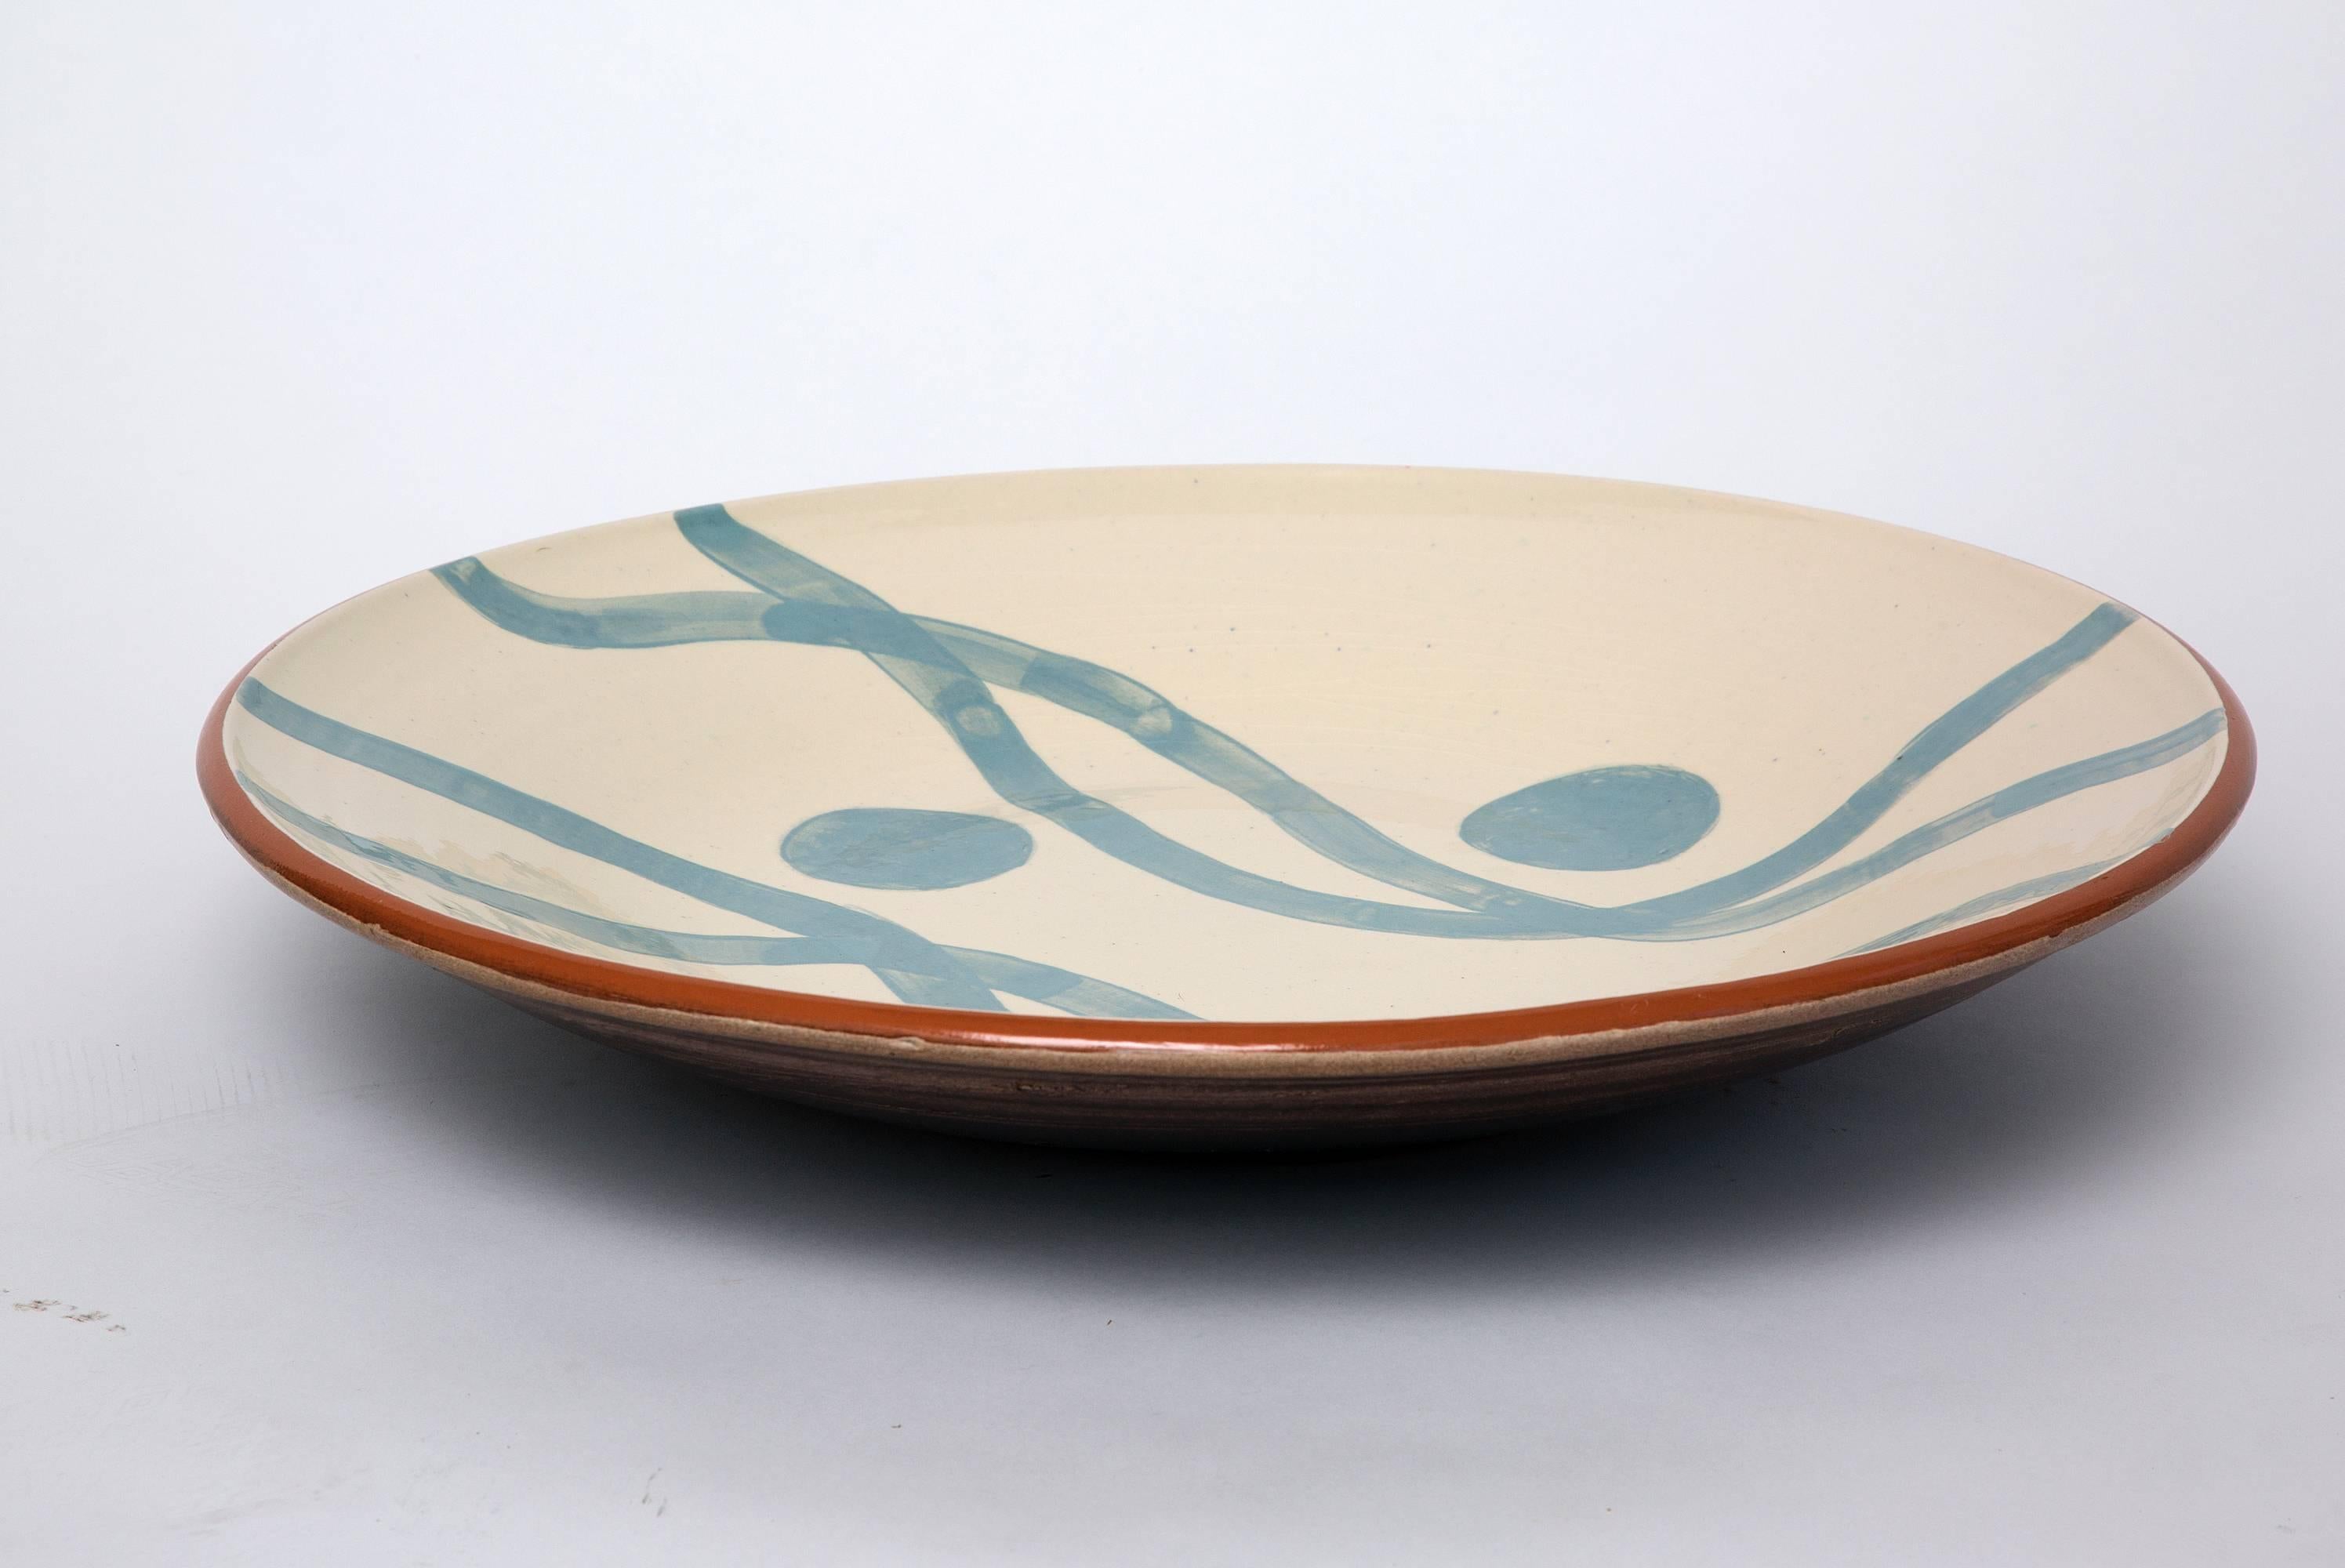 In the tradition of the Mediterranean ceramists Tibau here works with the theme of sea. Unique and signed Moises Tibau born in 1963. Lives and works in Cadaqués, Spain. He works with different themes: 